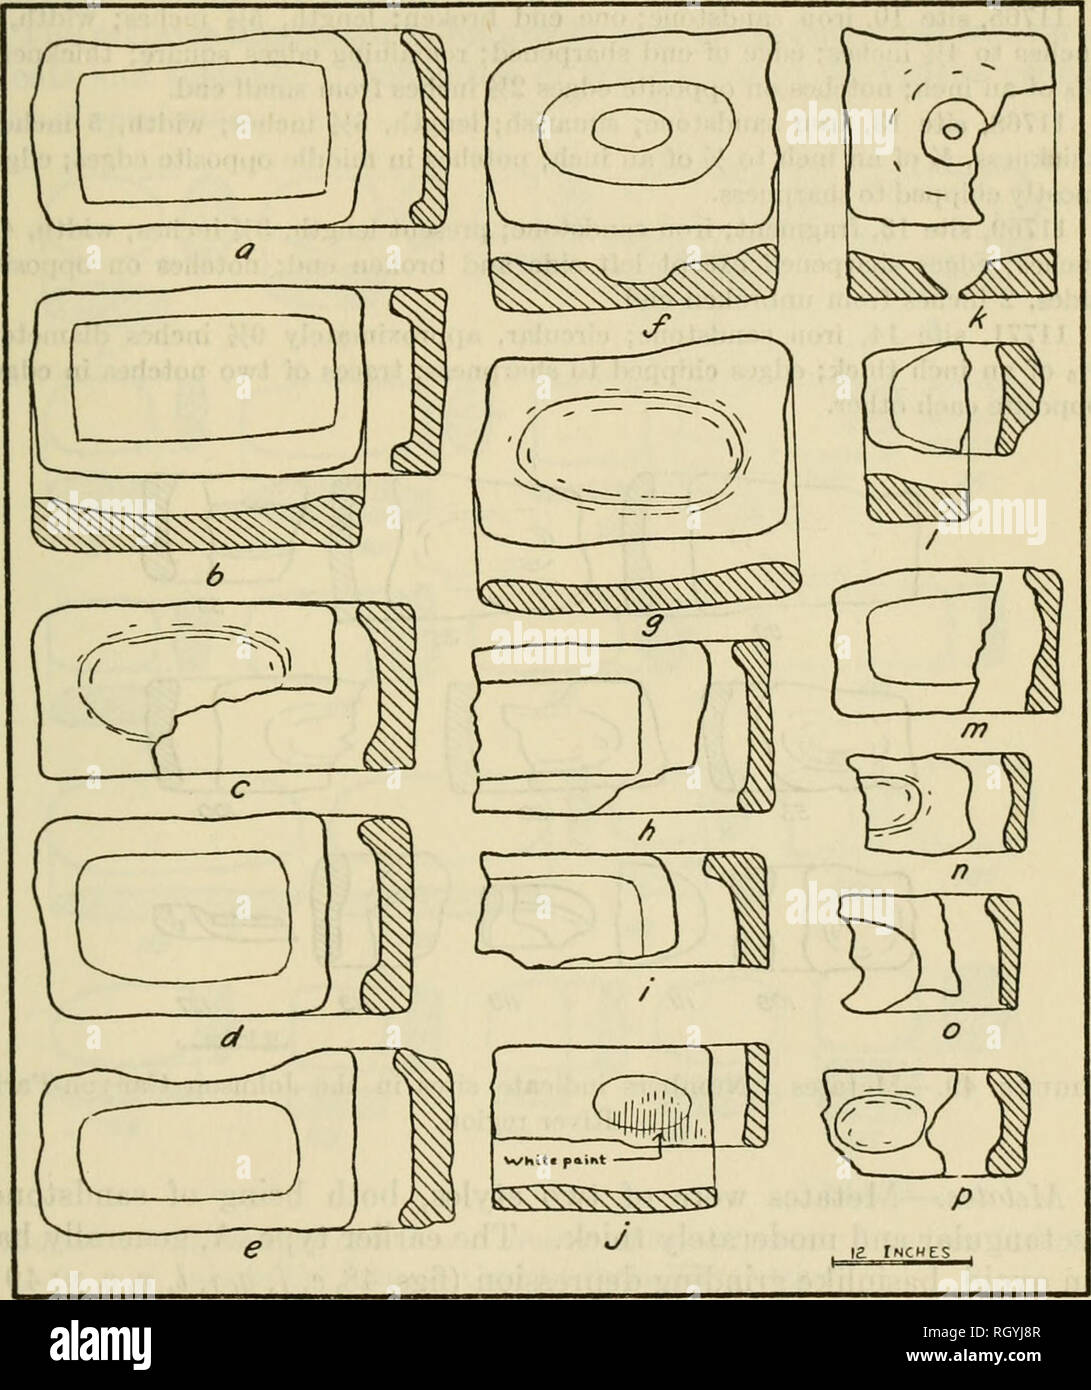 munt cafetaria Afkorting Bulletin. Ethnology. Anthkop. Fap. no. 18] UTAH ARCHEOLOGY—STEWARD 311 Site  2 also yielded three small, yellow, nondent kernels of maize, a squash  stem, and fragments of squash or gourd, and a